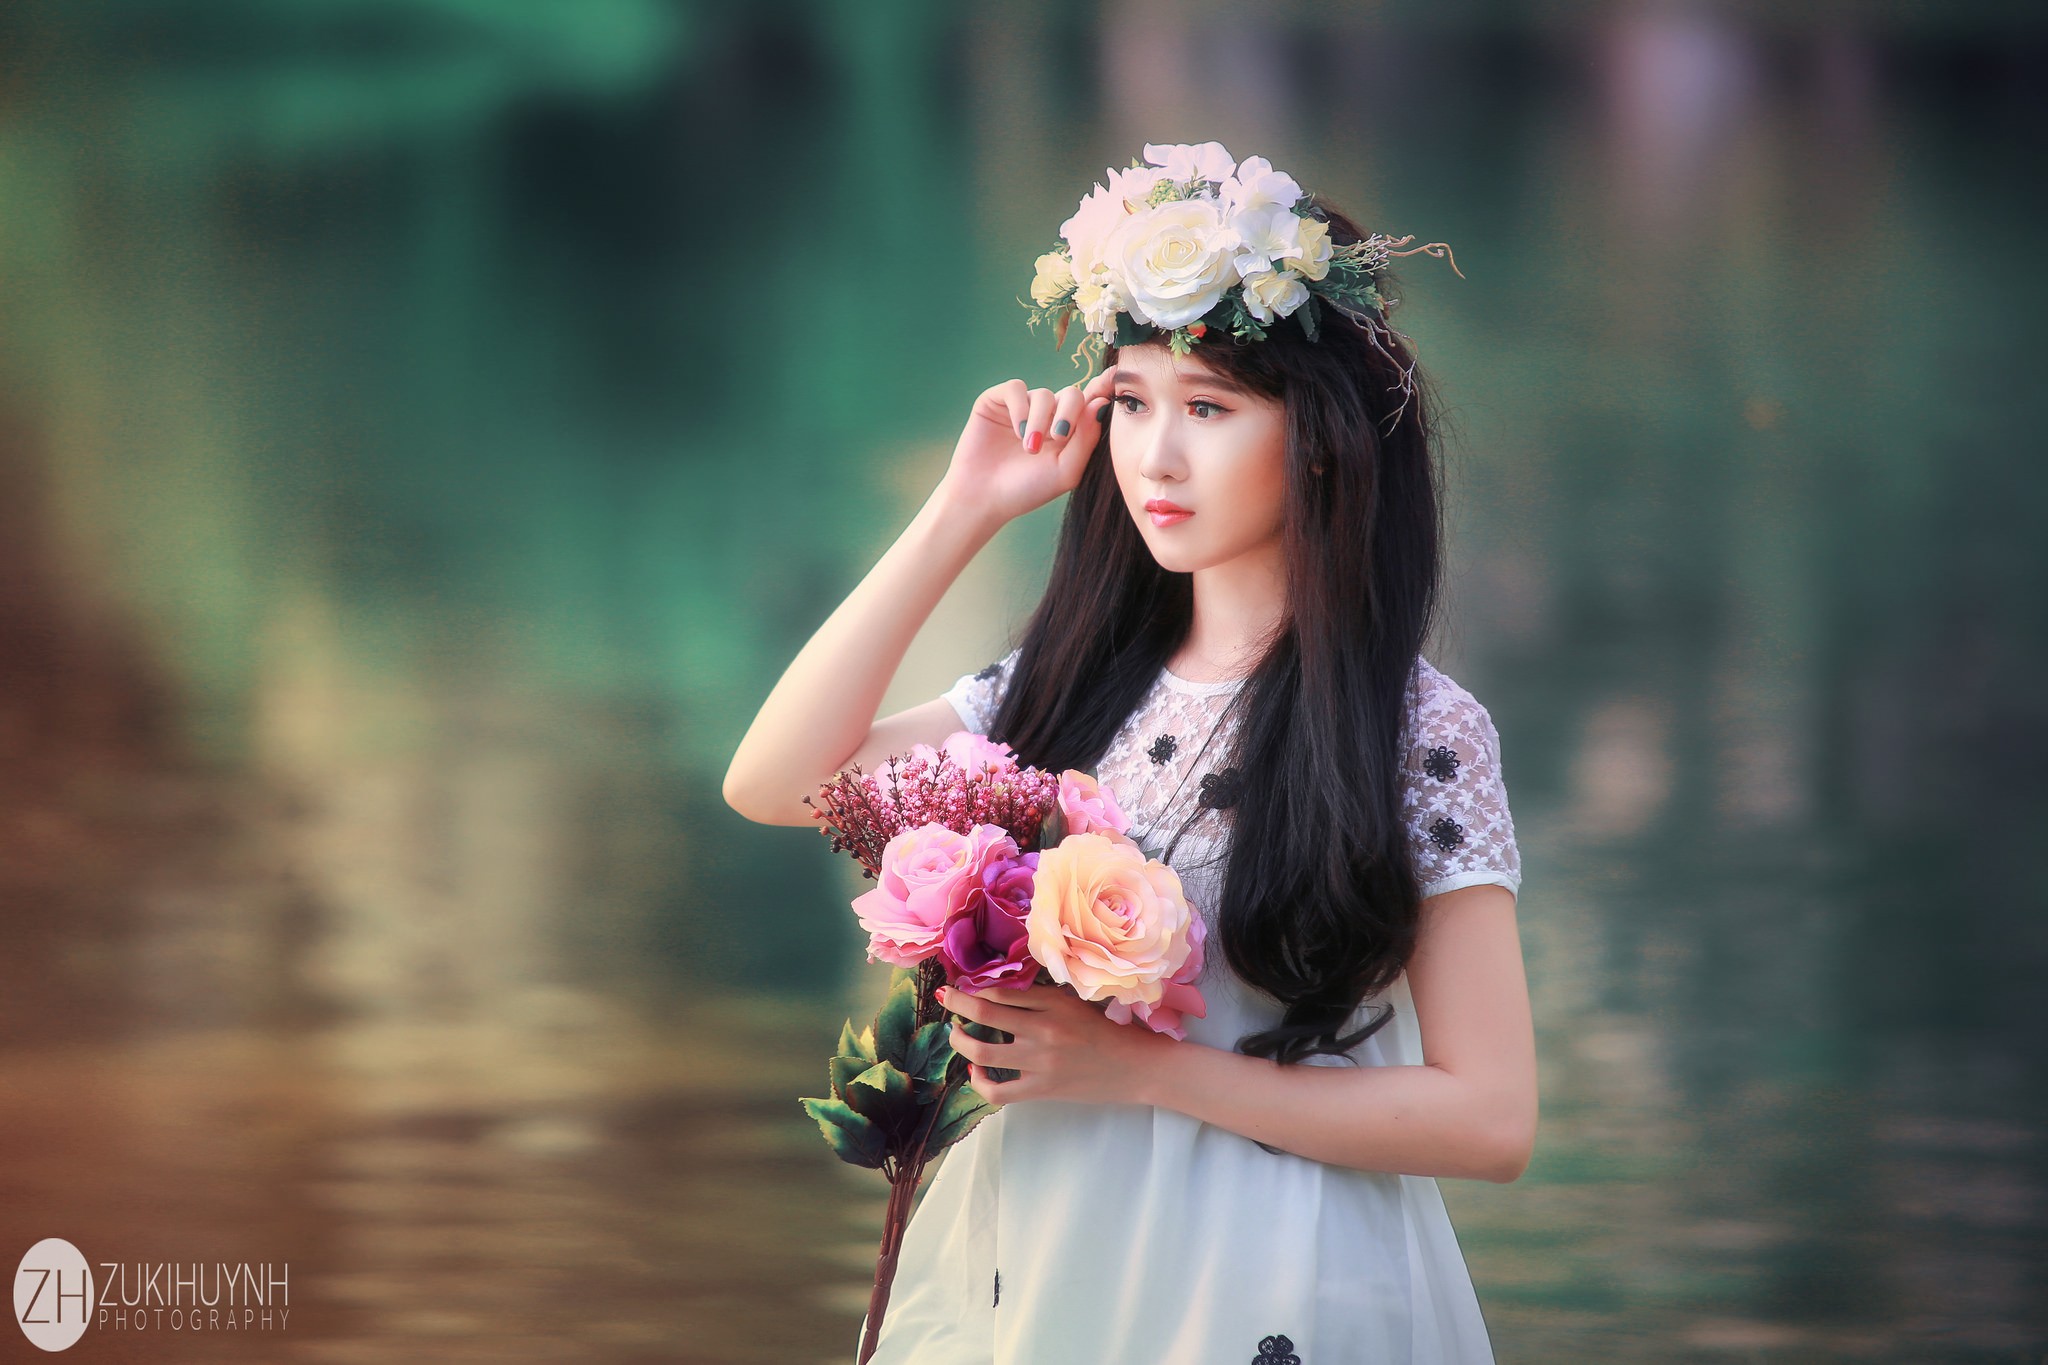 People 2048x1365 wreaths brunette bouquets flowers women Asian model women outdoors watermarked dark hair flower crown painted nails looking away dress white dress white clothing rose